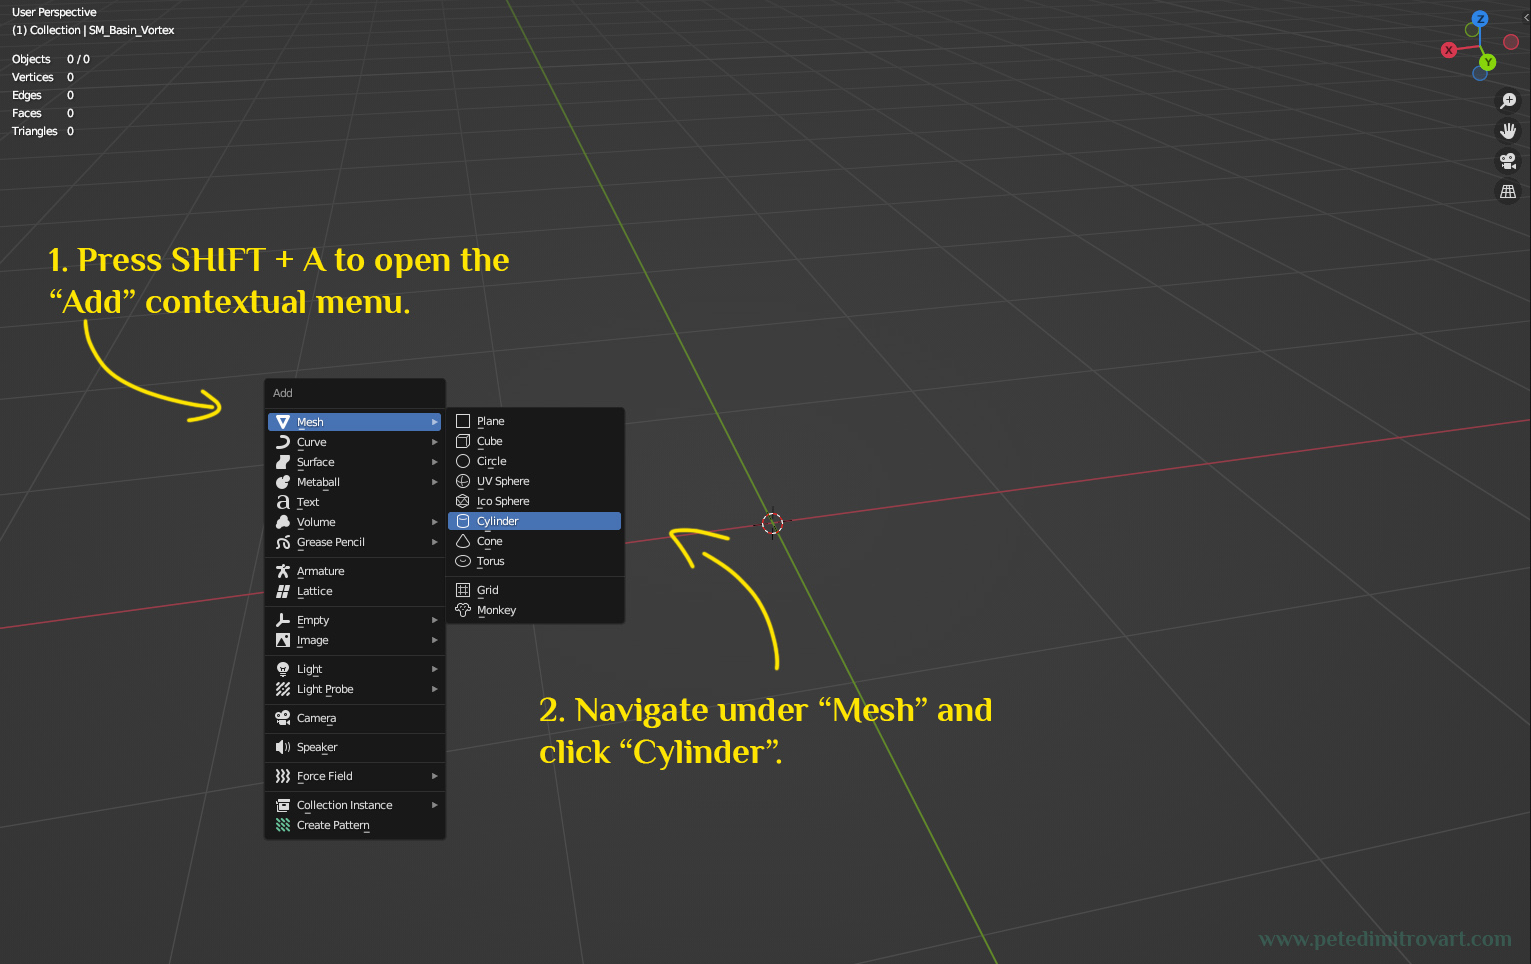 Blender screenshot. Shows blank scene. On top “Add” menu is open with the “Mesh - Cylinder” option selected. Text in image reads: “1. Press SHIFT + A to open “Add” contextual menu. 2. Navigate under “Mesh” and click “Cylinder”.